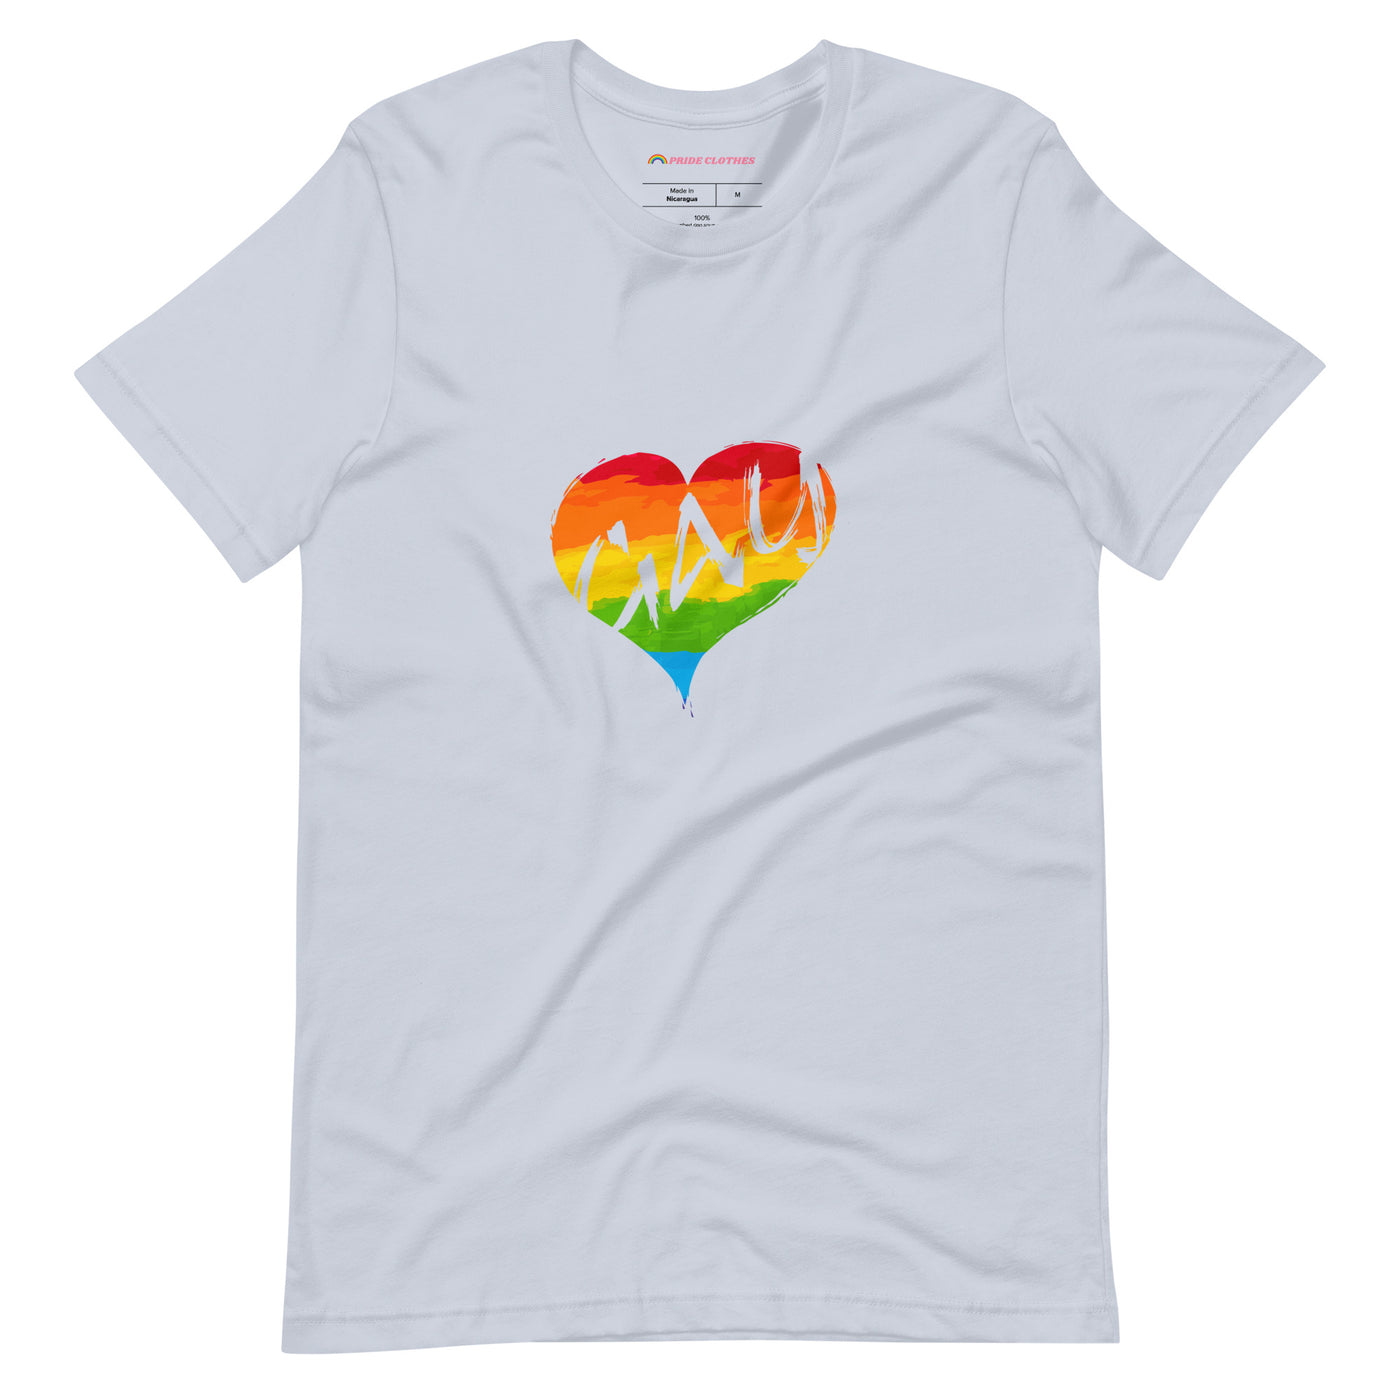 Pride Clothes - My Heart is Full Happy and Gay Rainbow TShirt - Light Blue